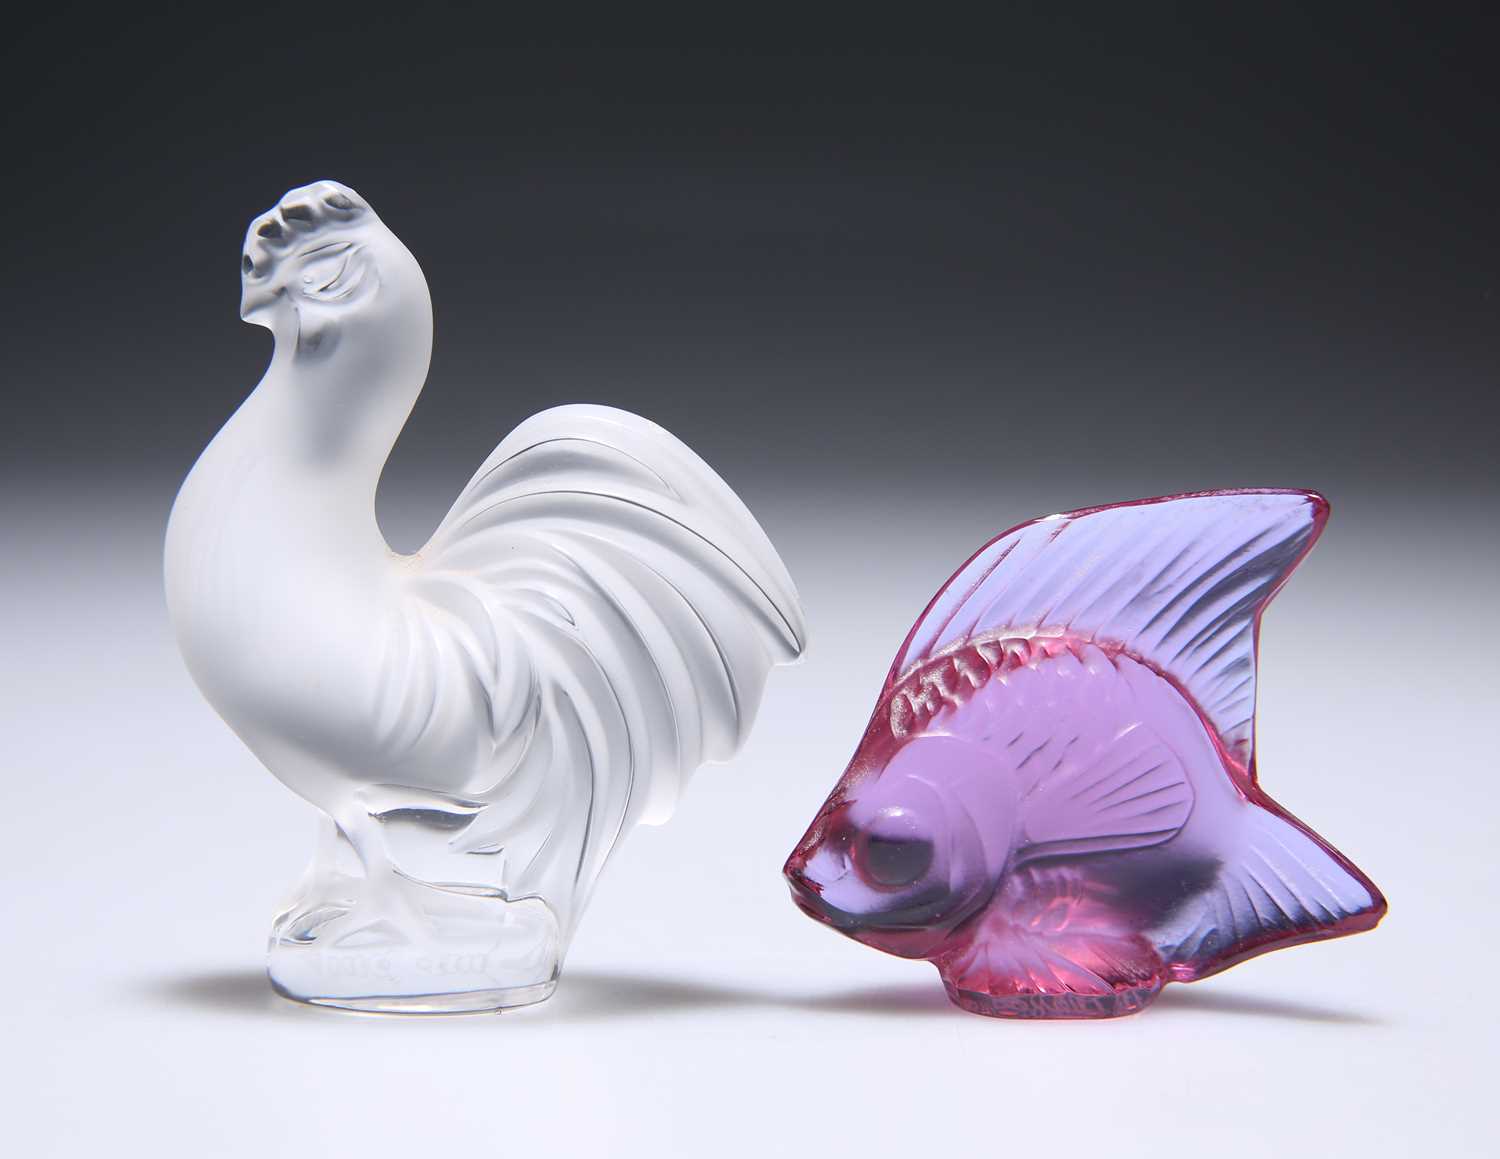 TWO SMALL LALIQUE ANIMAL MODELS